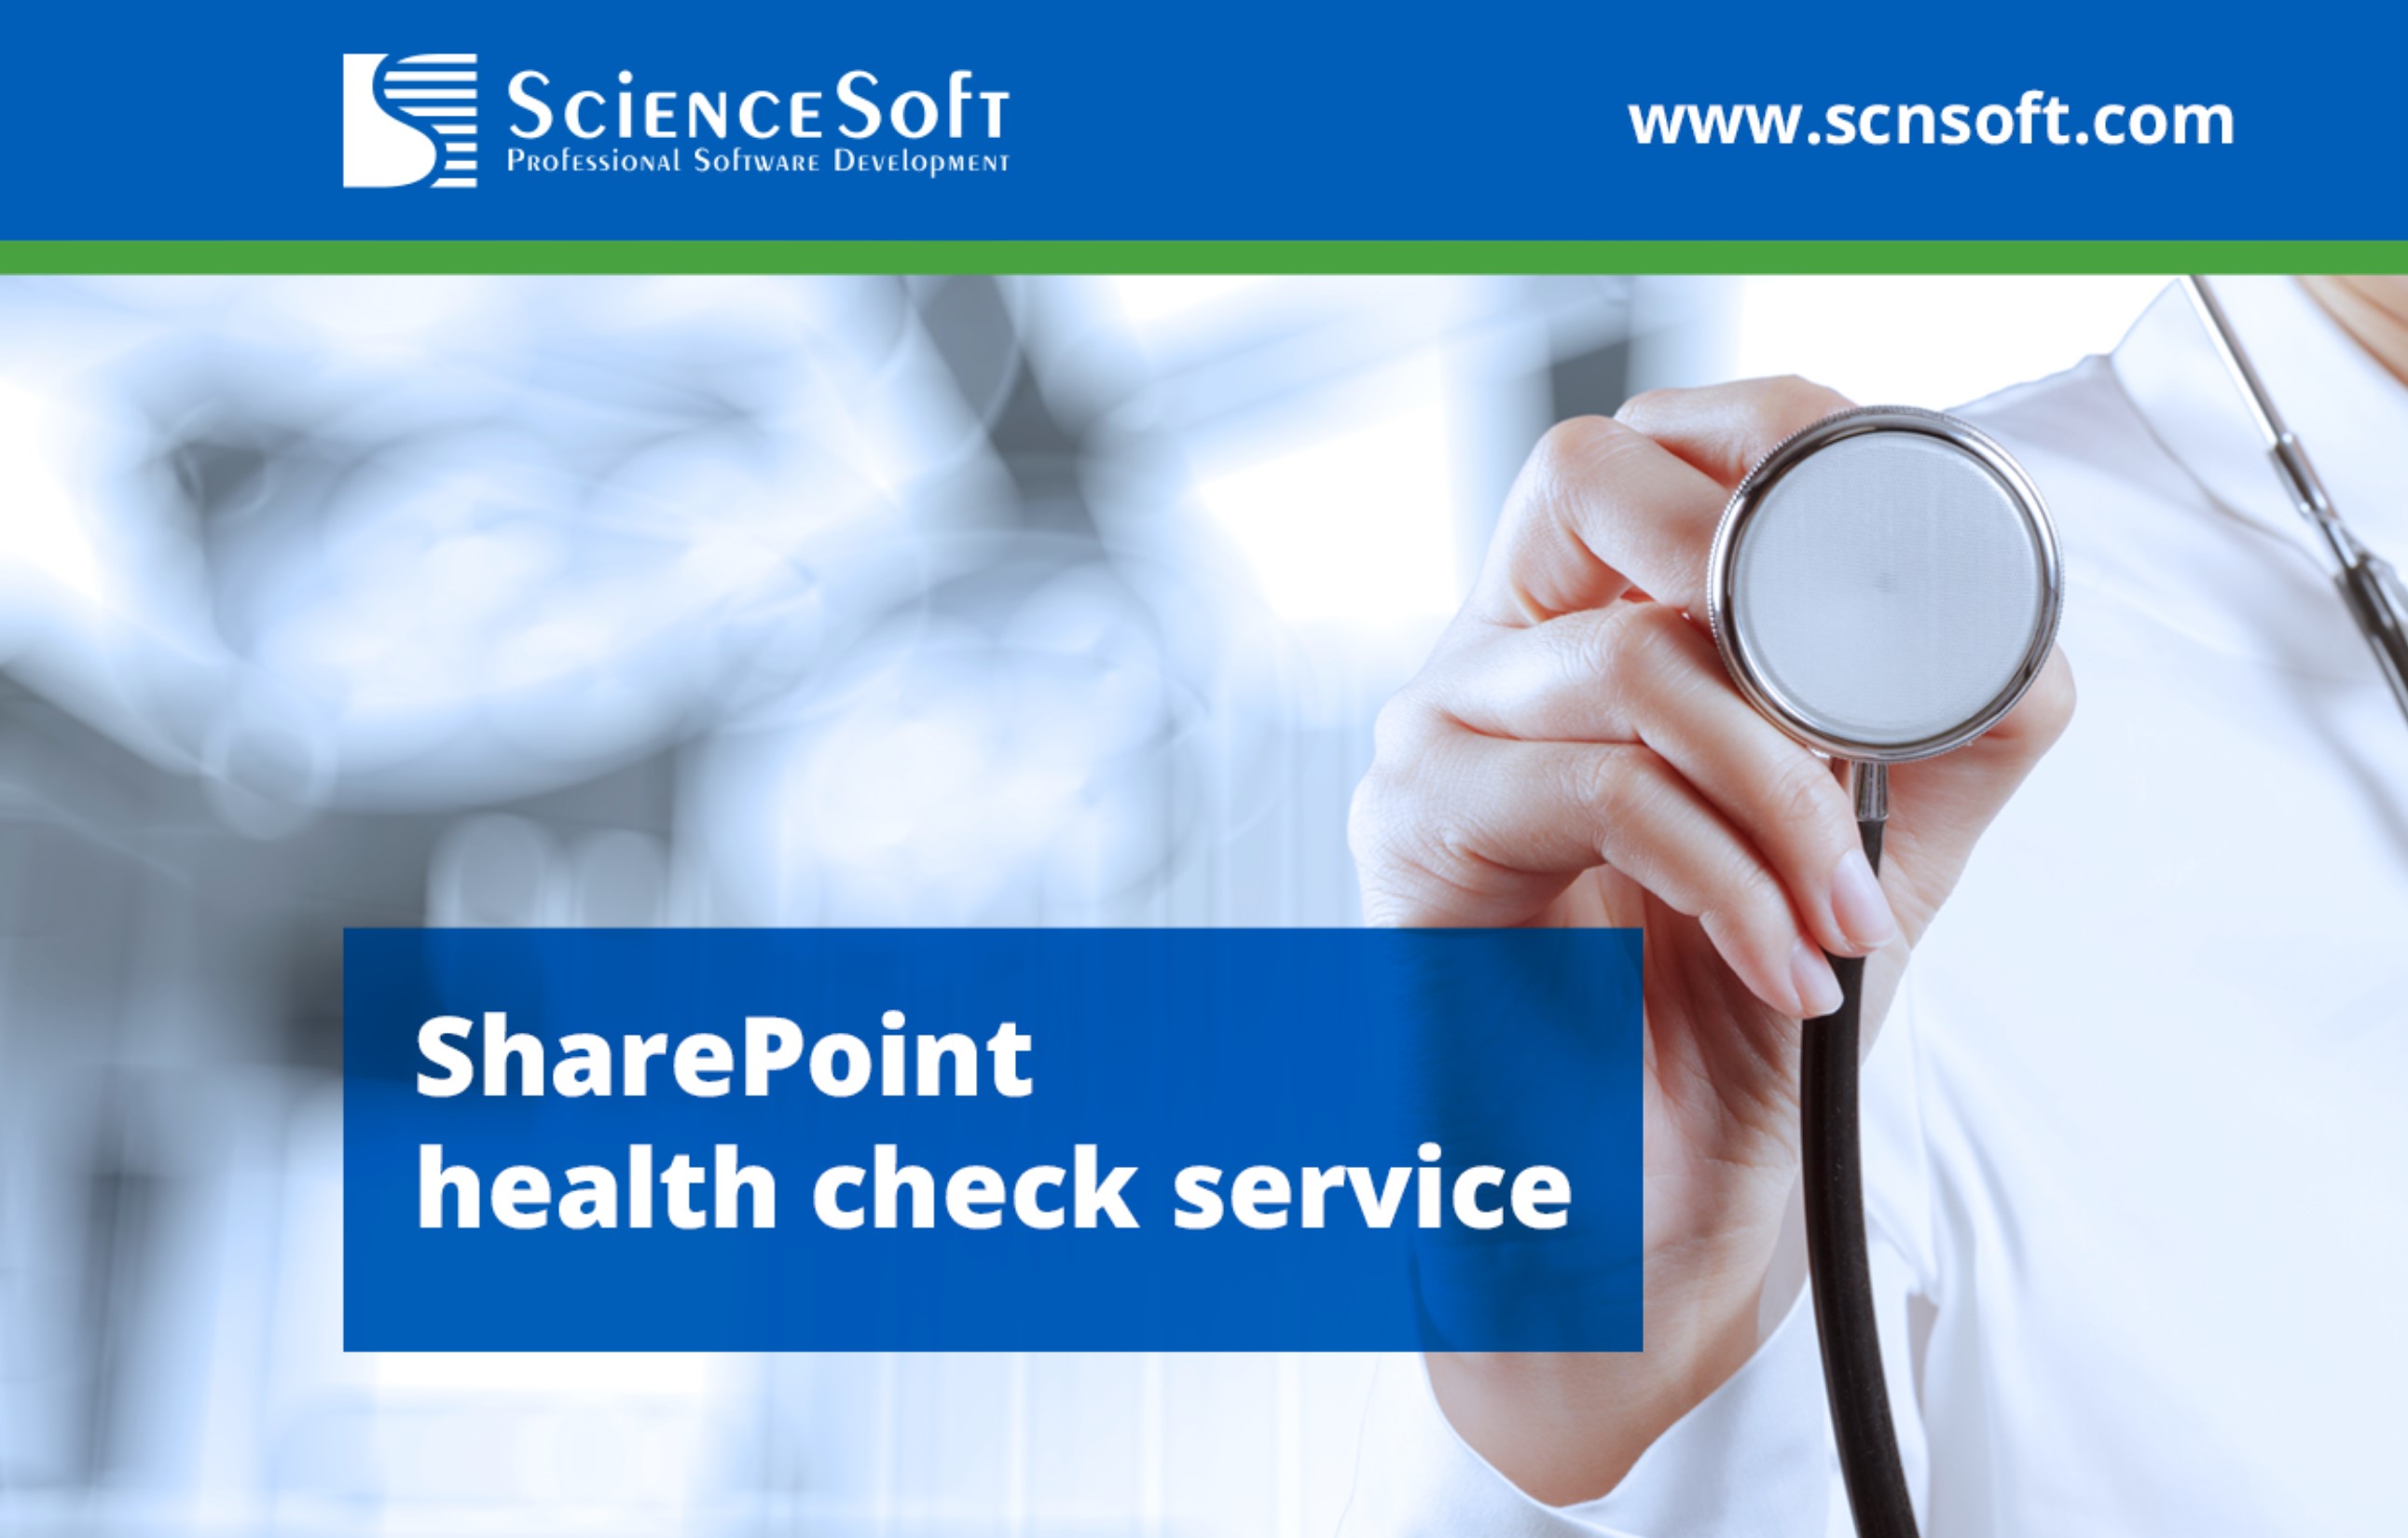 sciencesoft helps companies maximize return on their sharepoint investments